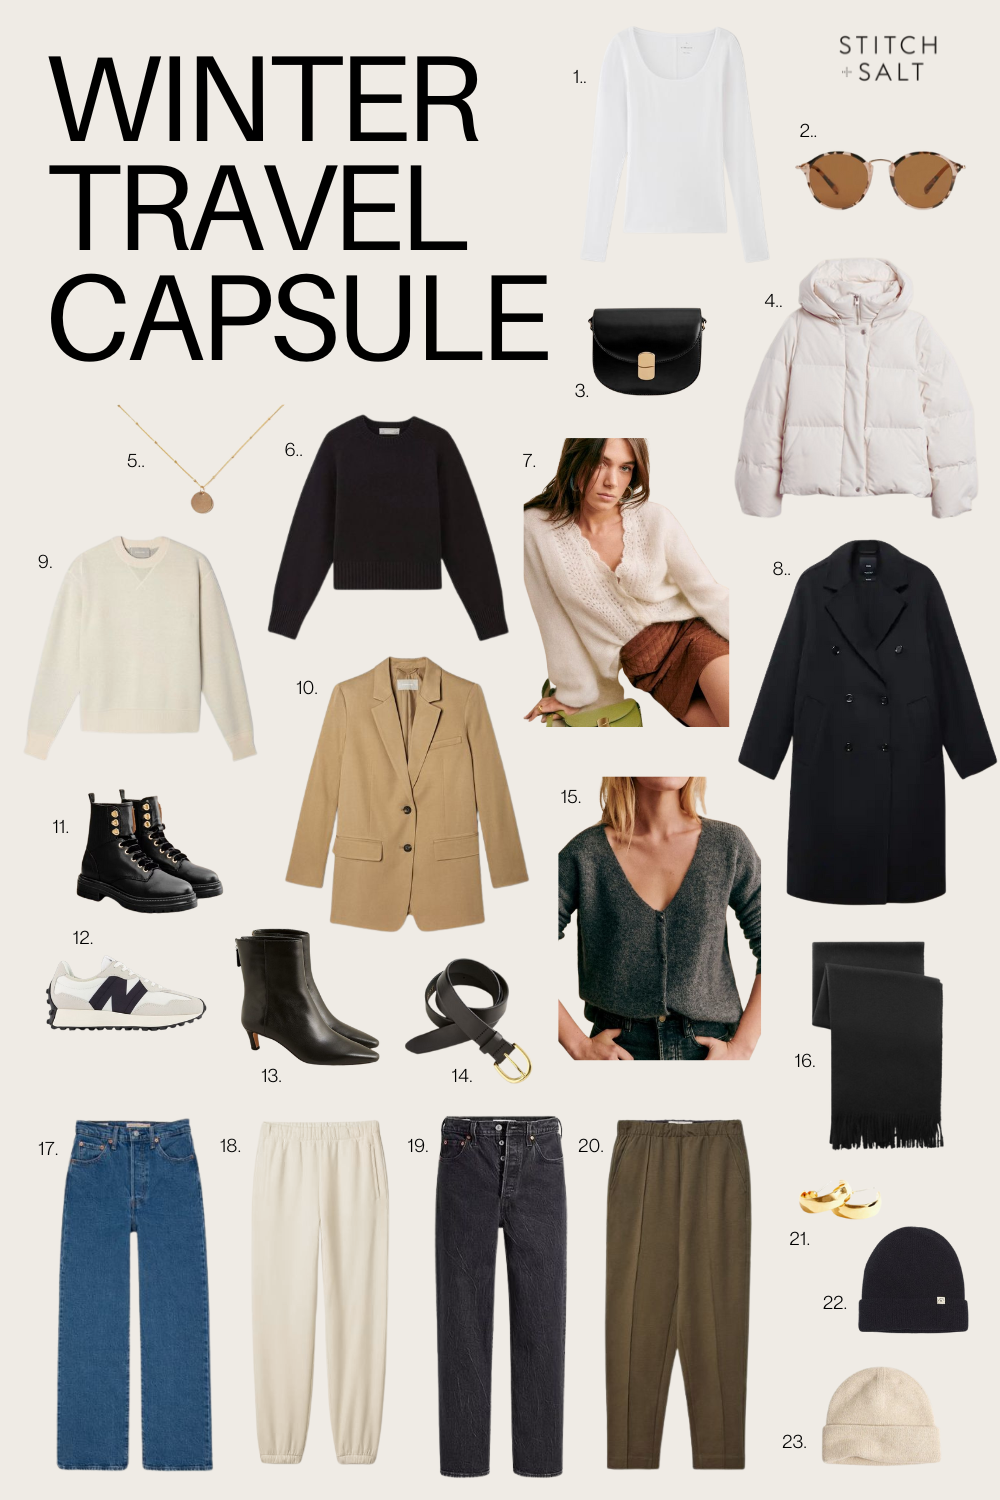 Casual Chic Spring Capsule Wardrobe + 17 Outfit Ideas - Stitch & Salt